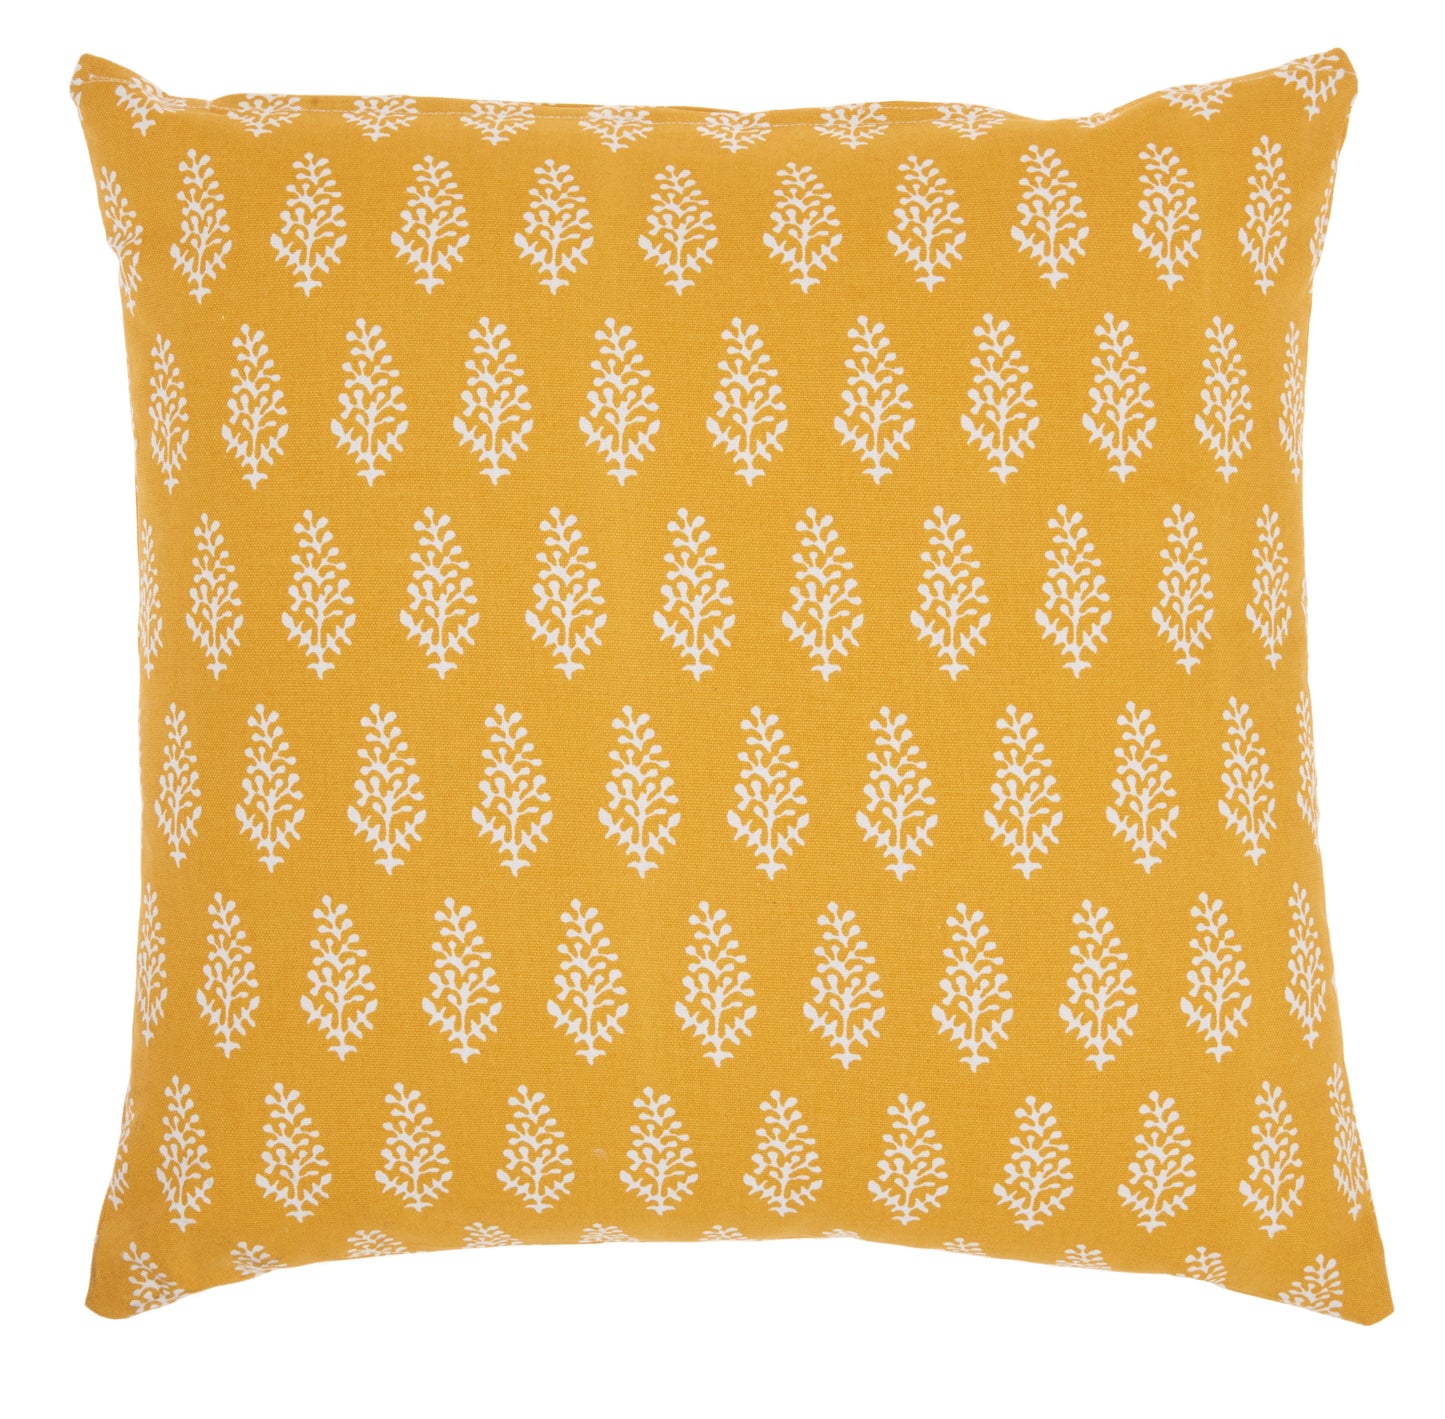 Life Styles SS910 Cotton Printed Leaves Throw Pillow From Mina Victory By Nourison Rugs